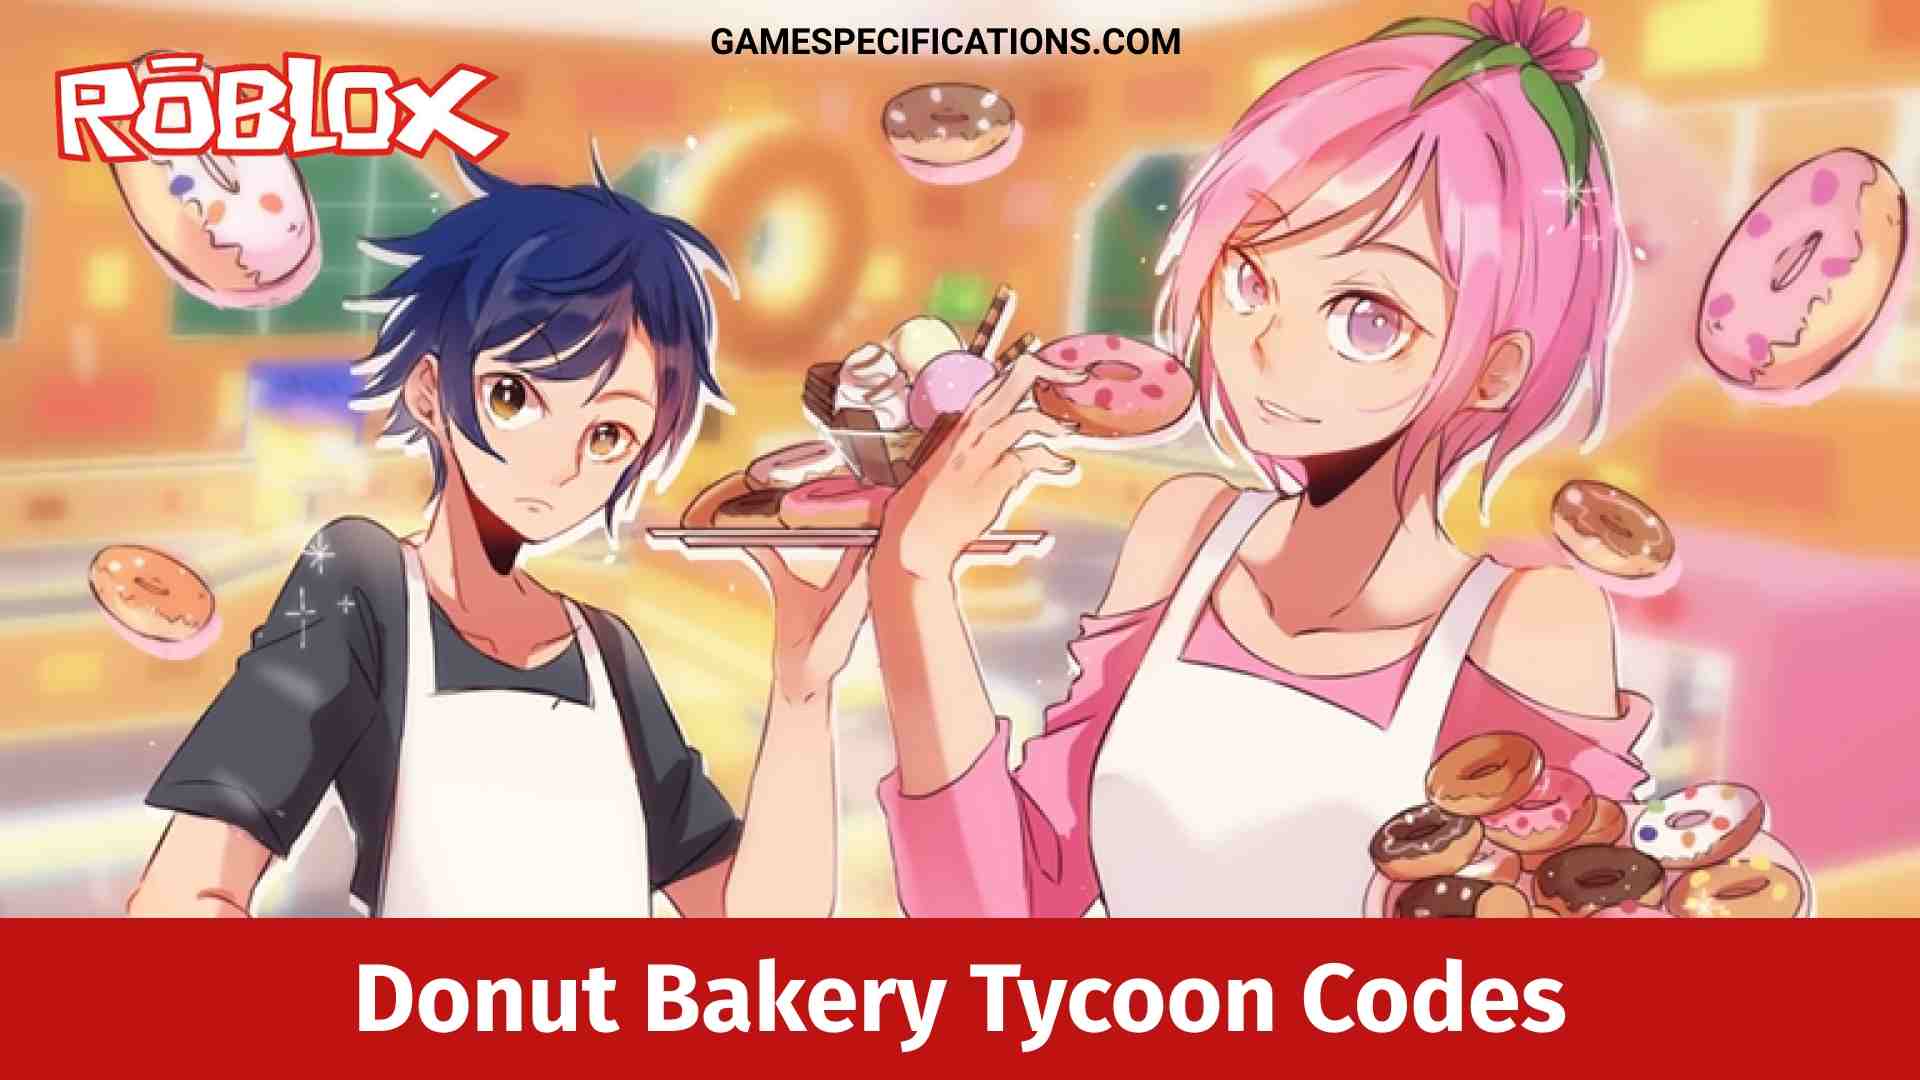 20 Working Roblox Donut Bakery Tycoon Codes July 2021 Game Specifications - roblox bakery tycoon codes